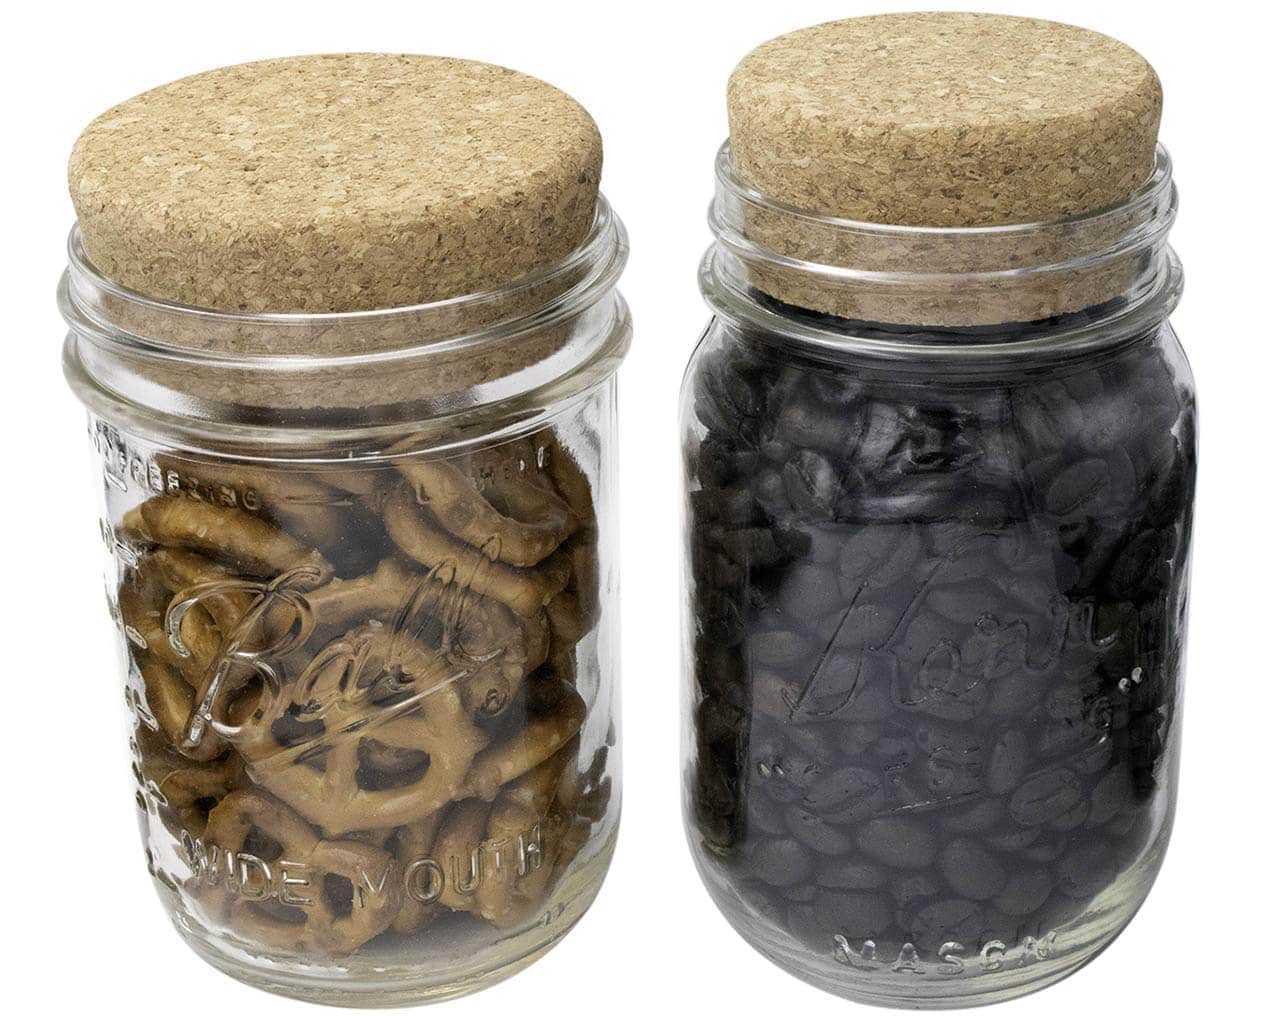 Cork Stopper Storage Lid for Regular and Wide Mouth Mason Jars